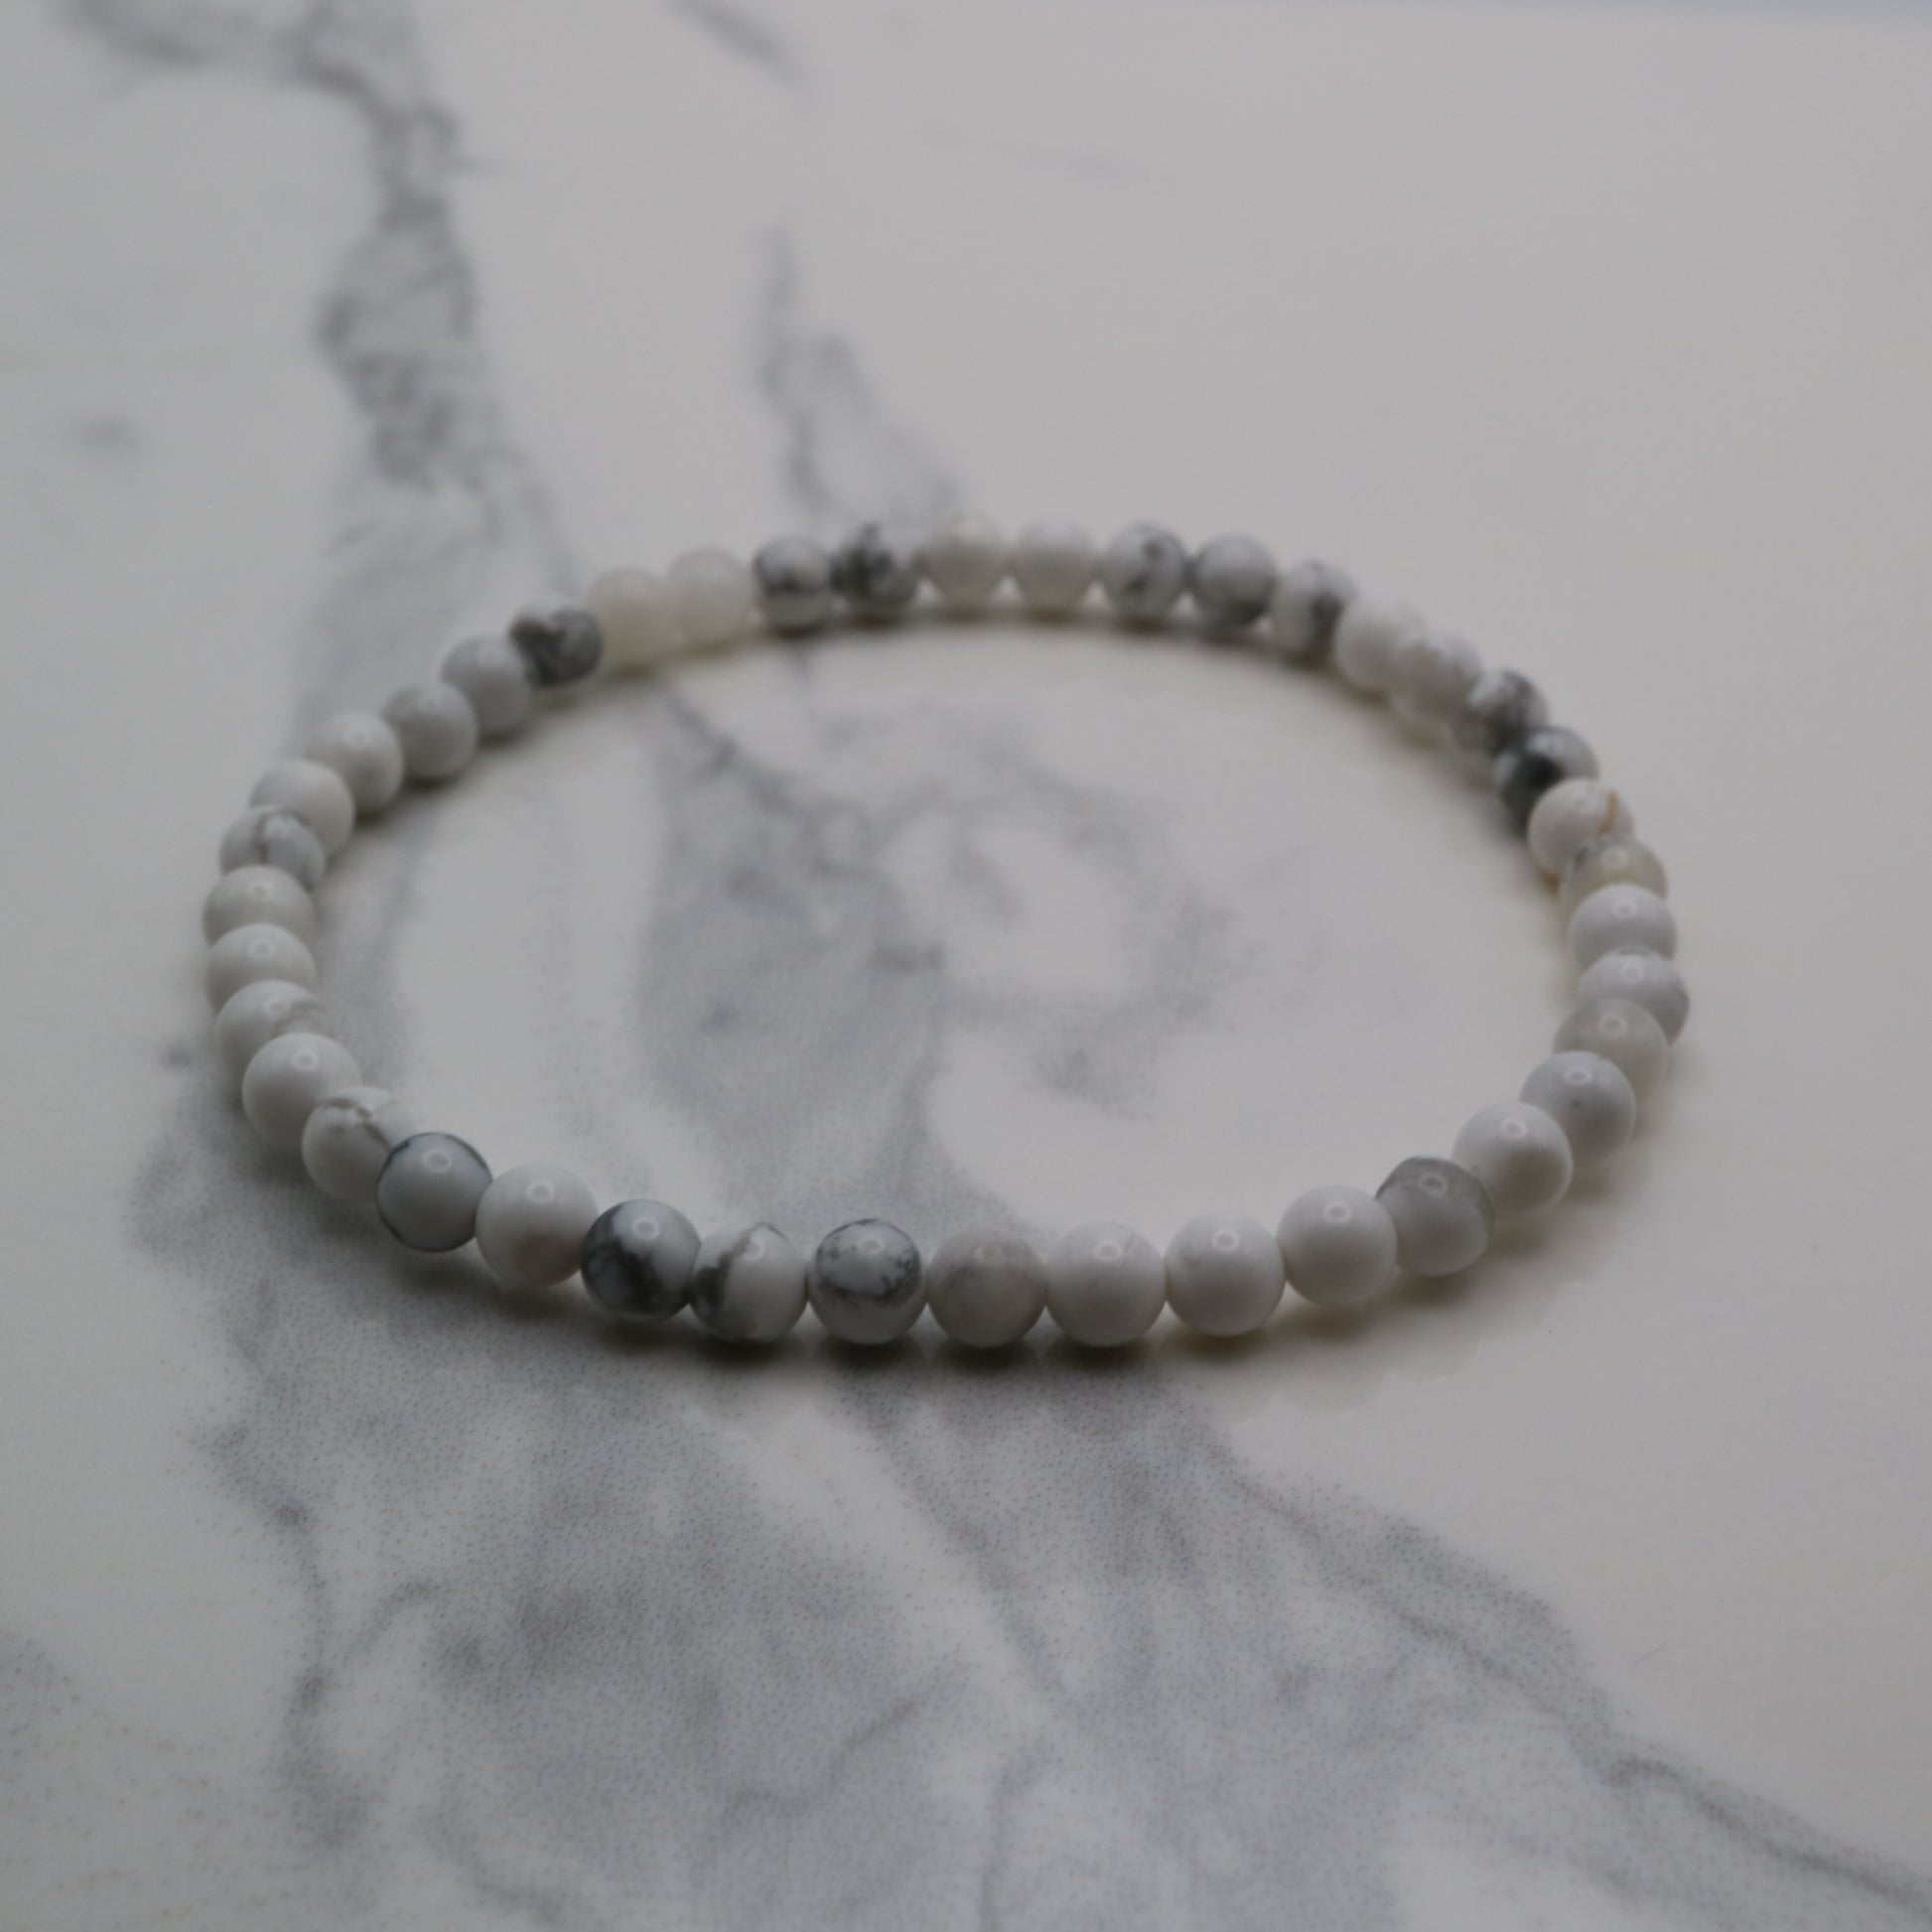 Howlite crystal bead bracelet with 4mm size beads